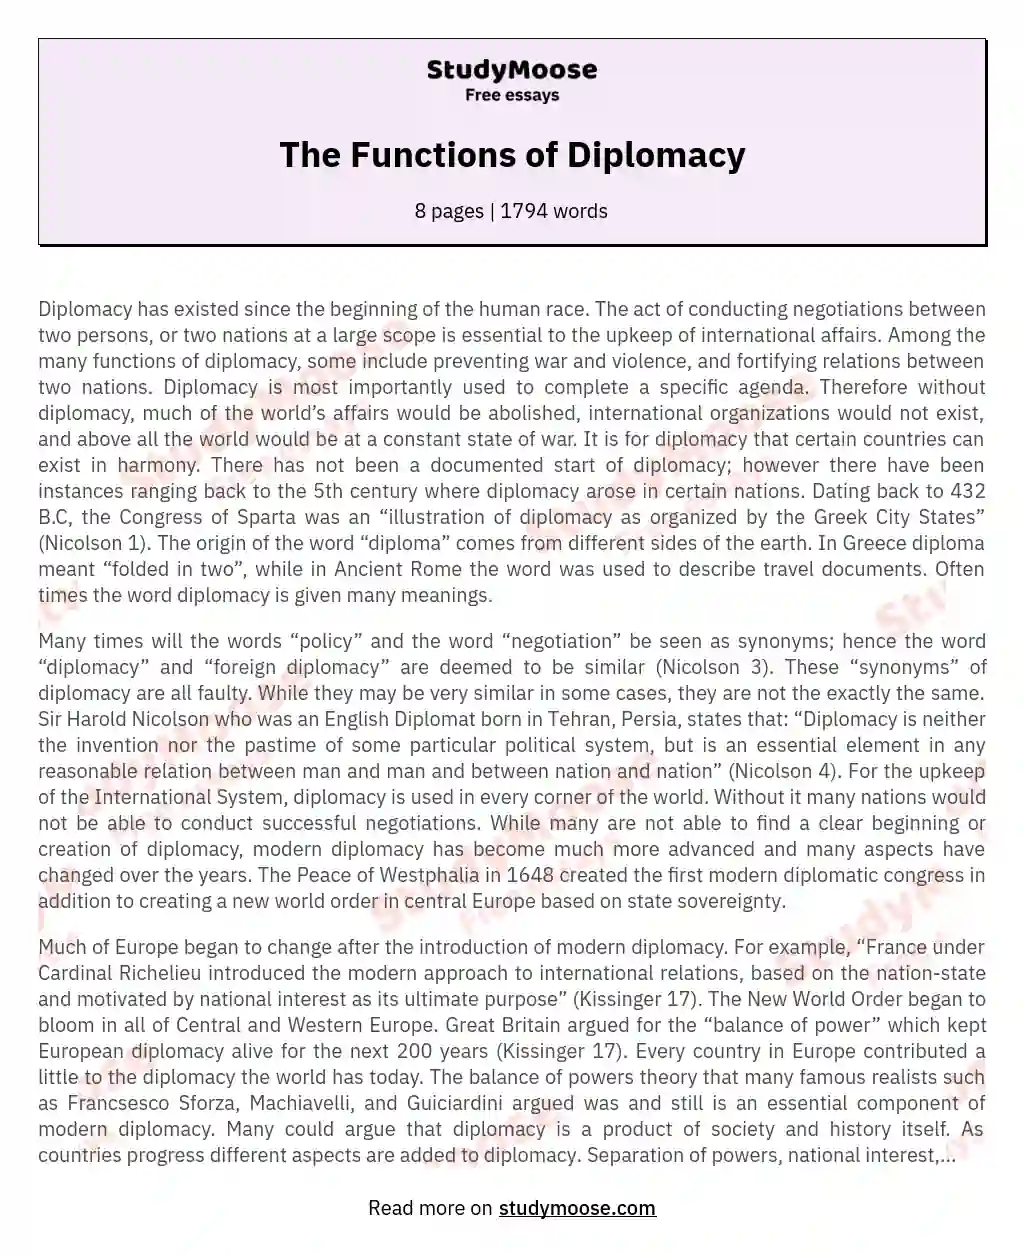 The Functions of Diplomacy essay